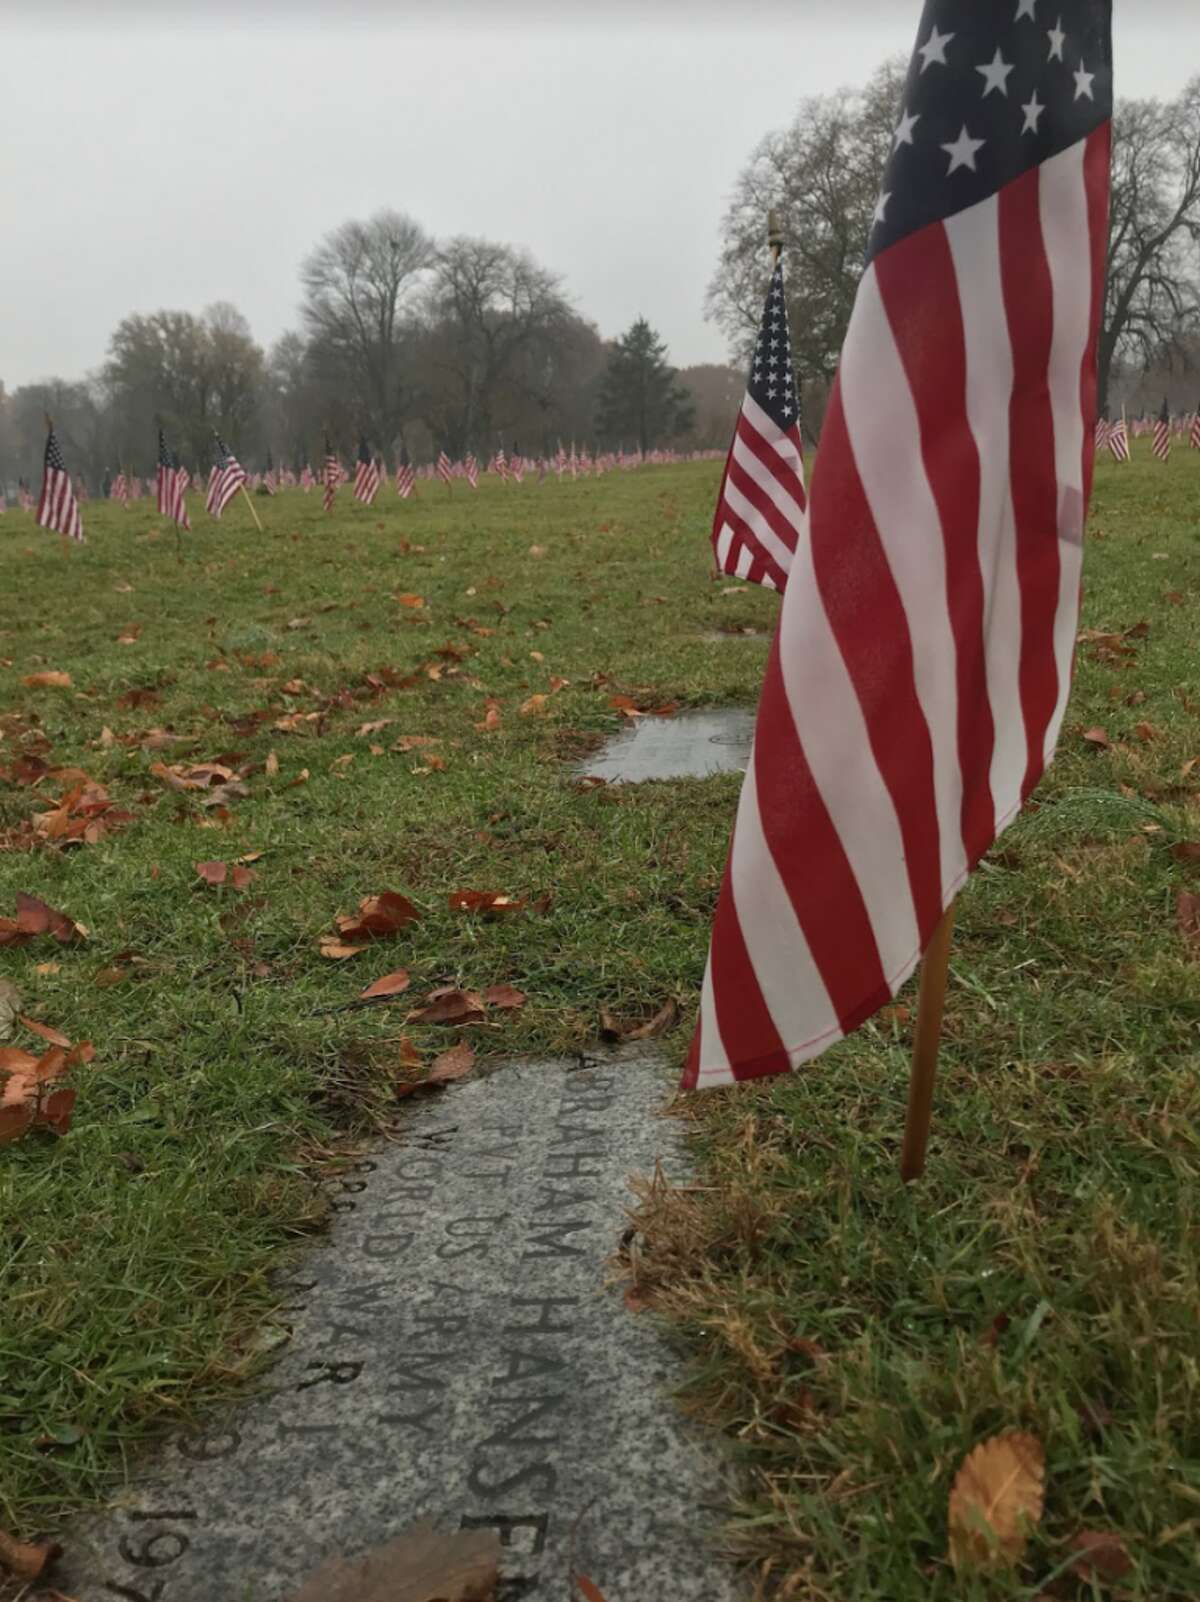 A flag is placed on every grave in Darien’s historic Veterans Cemetery at Spring Grove. The graves represent veterans from as far back as World War I, including this one. — Susan Shultz photo